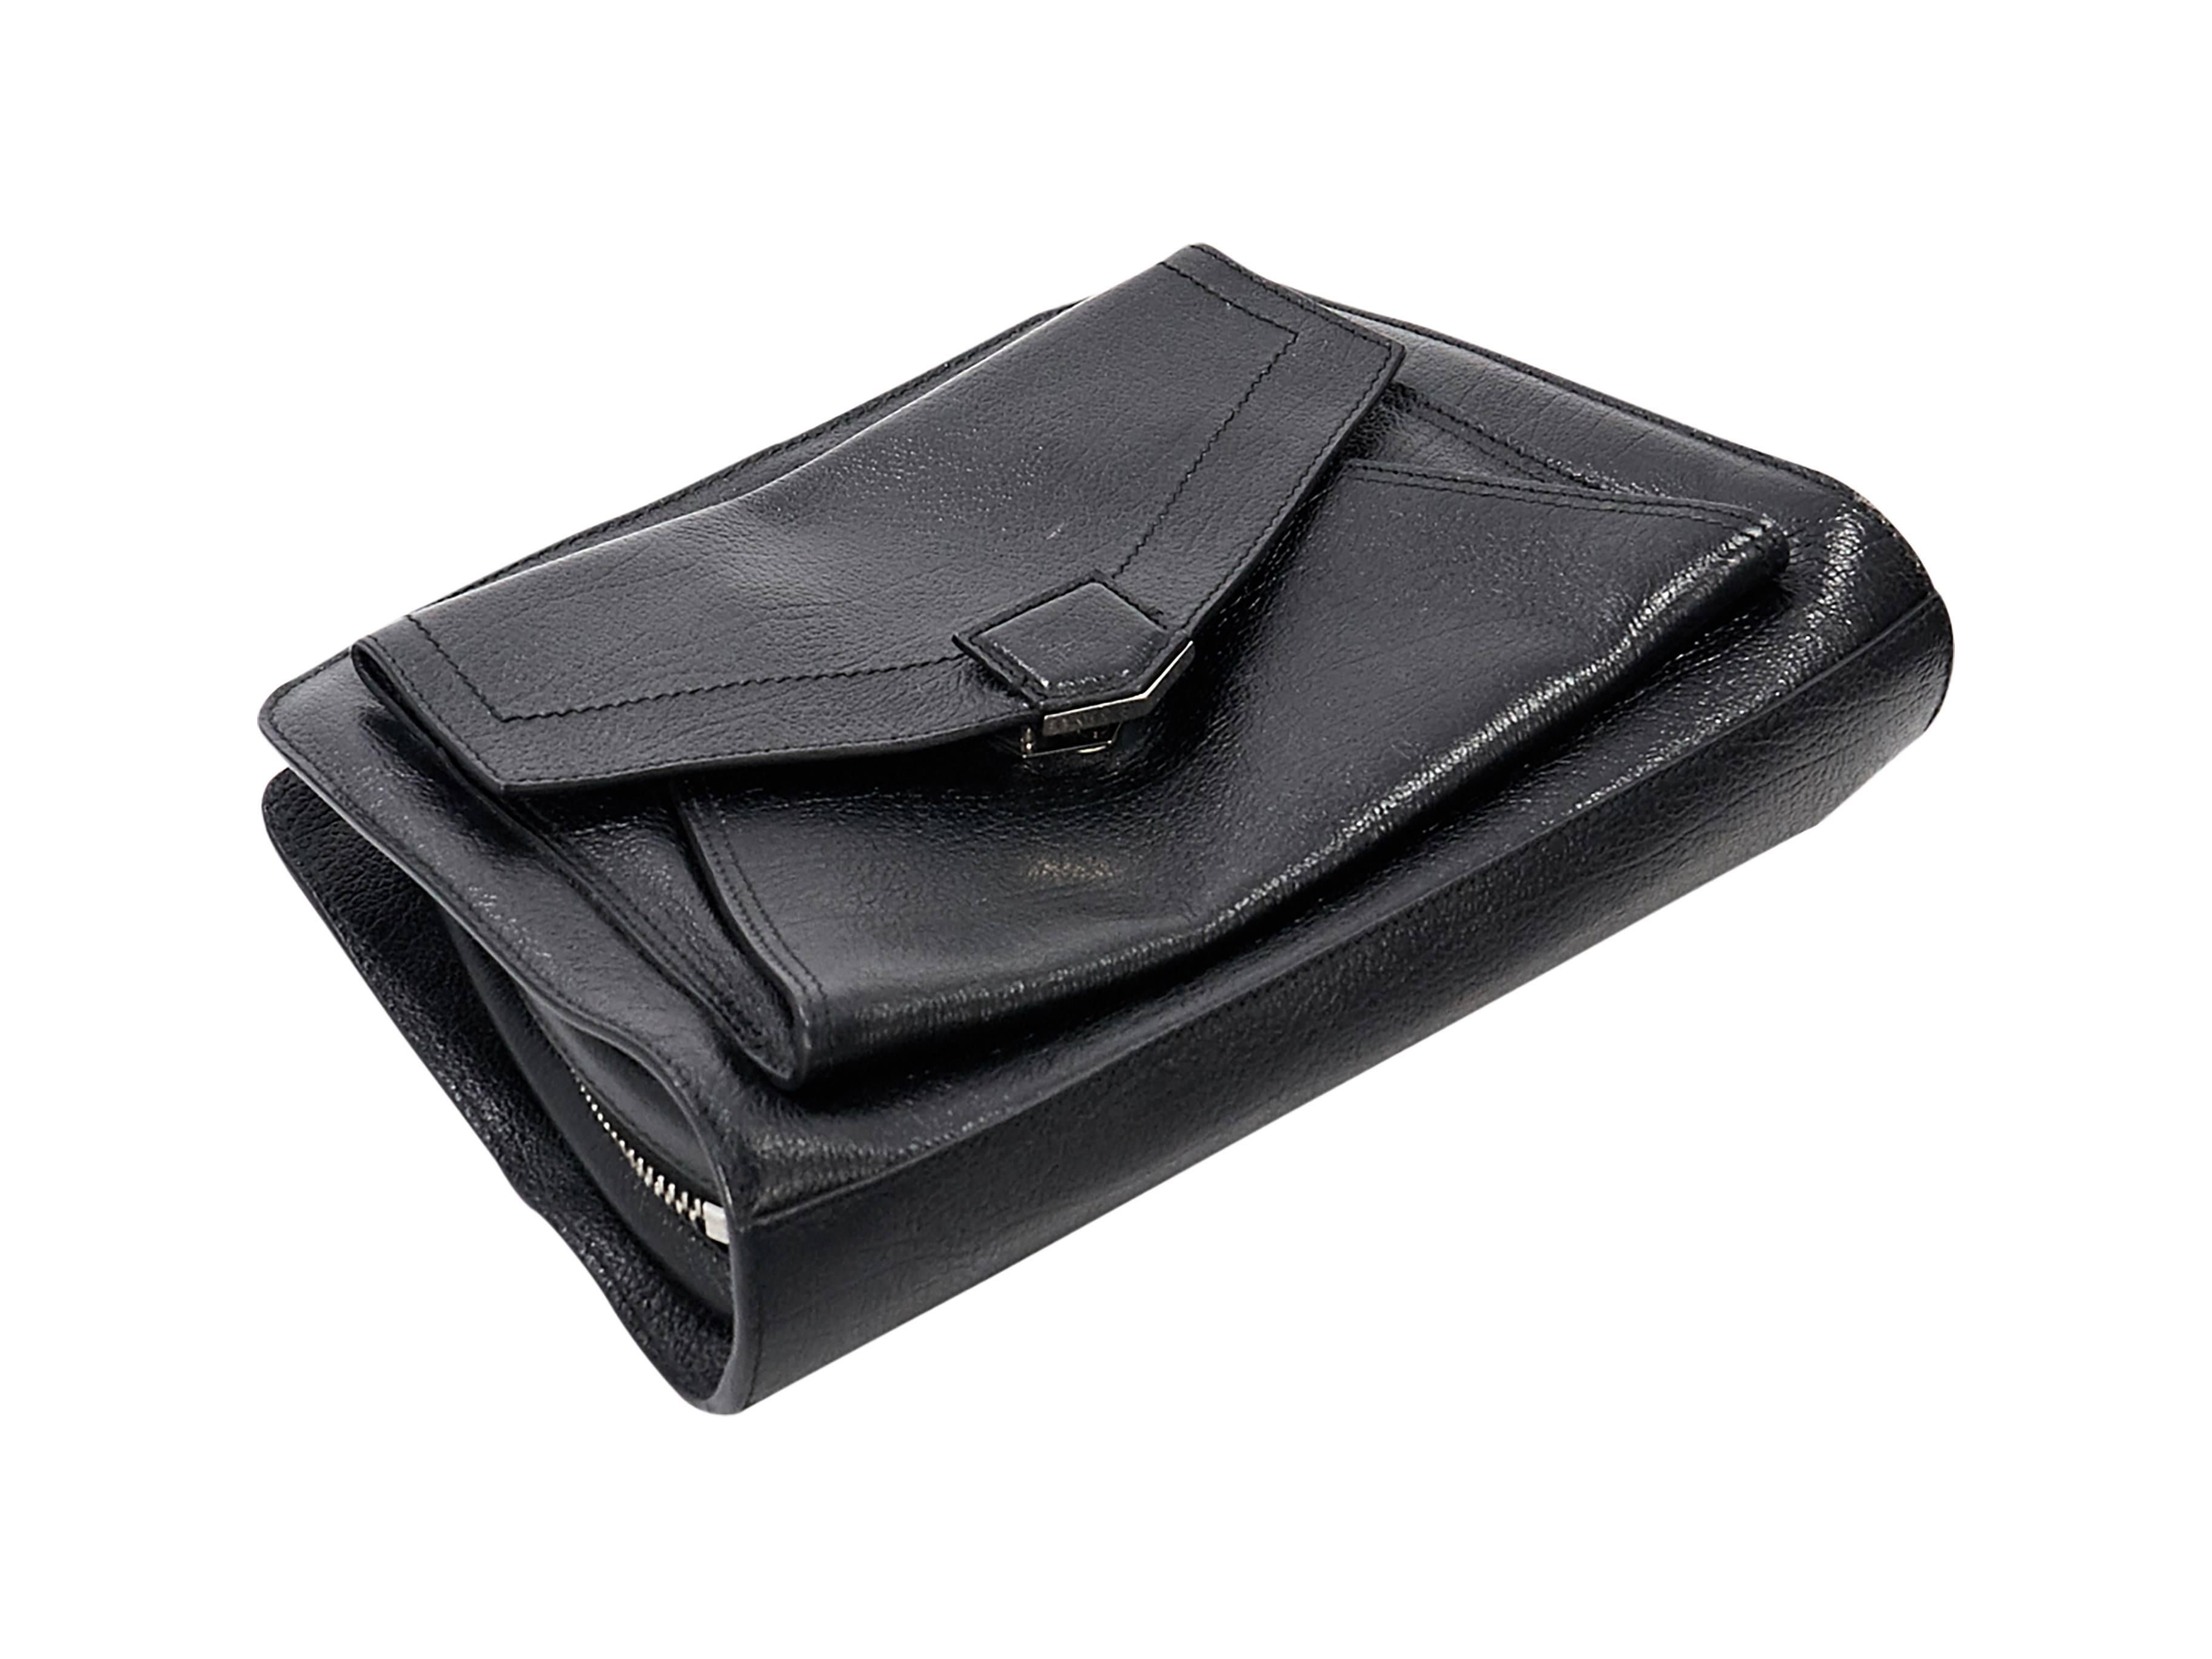 Product details: Black leather PS13 clutch by Proenza Schouler. Top zip closure. Front flap pocket. Lined interior with inner zip pocket. Back exterior zip pocket. Silvertone hardware. 11